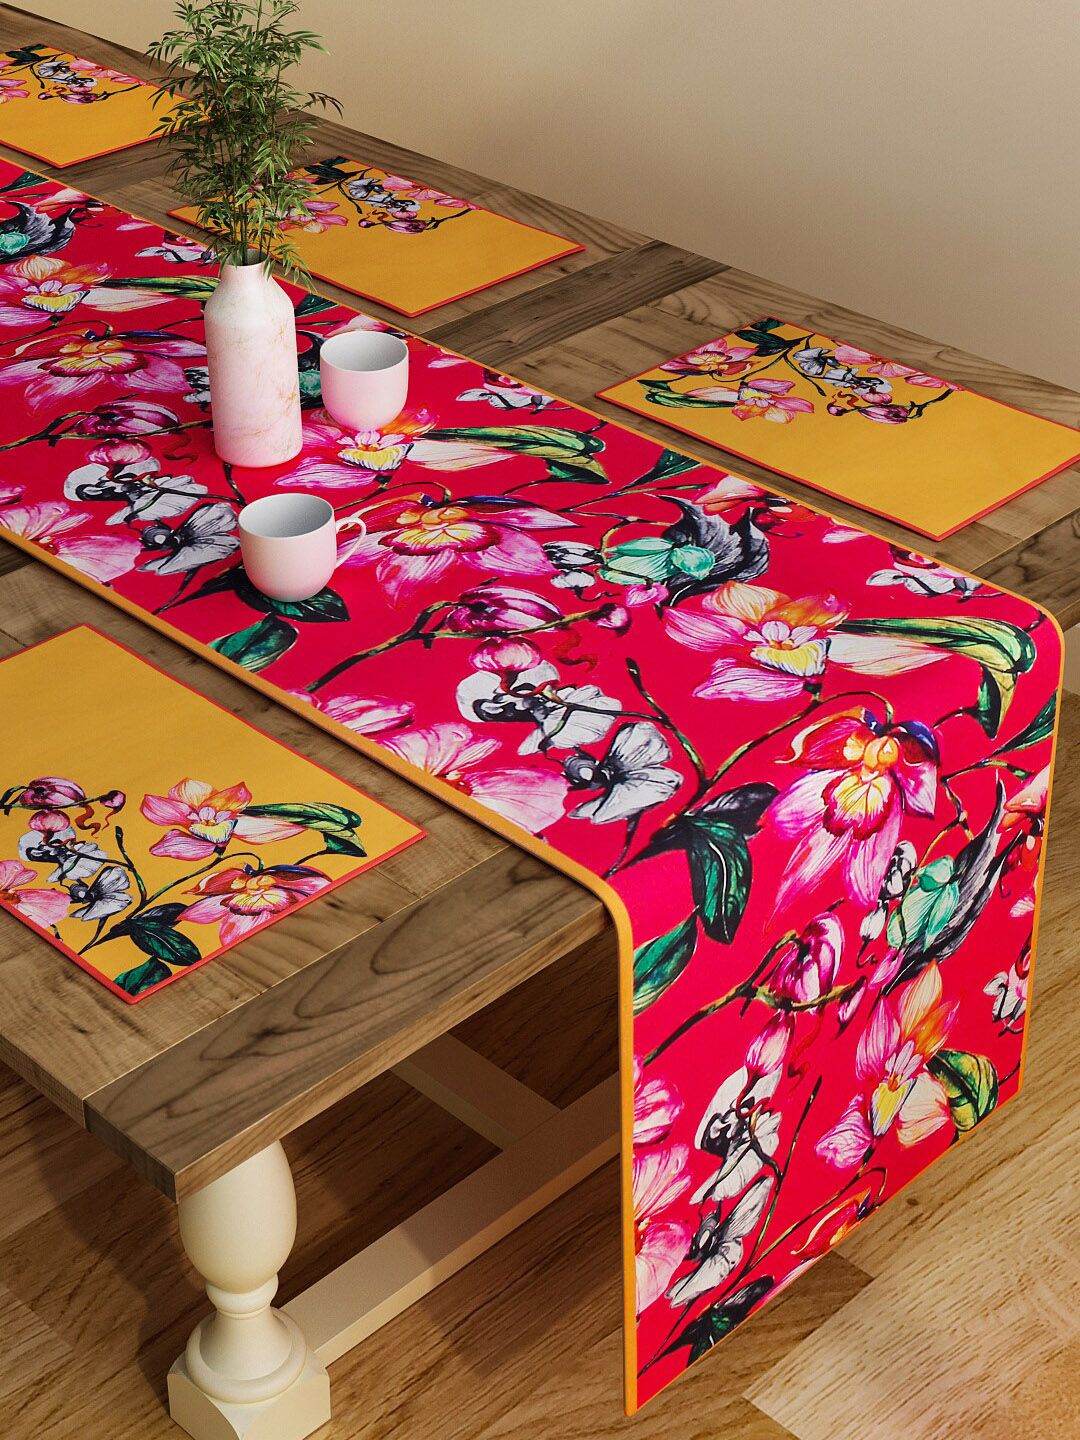 SEJ by Nisha Gupta Set of 6 Red Printed Cotton Table Placemats and Runner Price in India